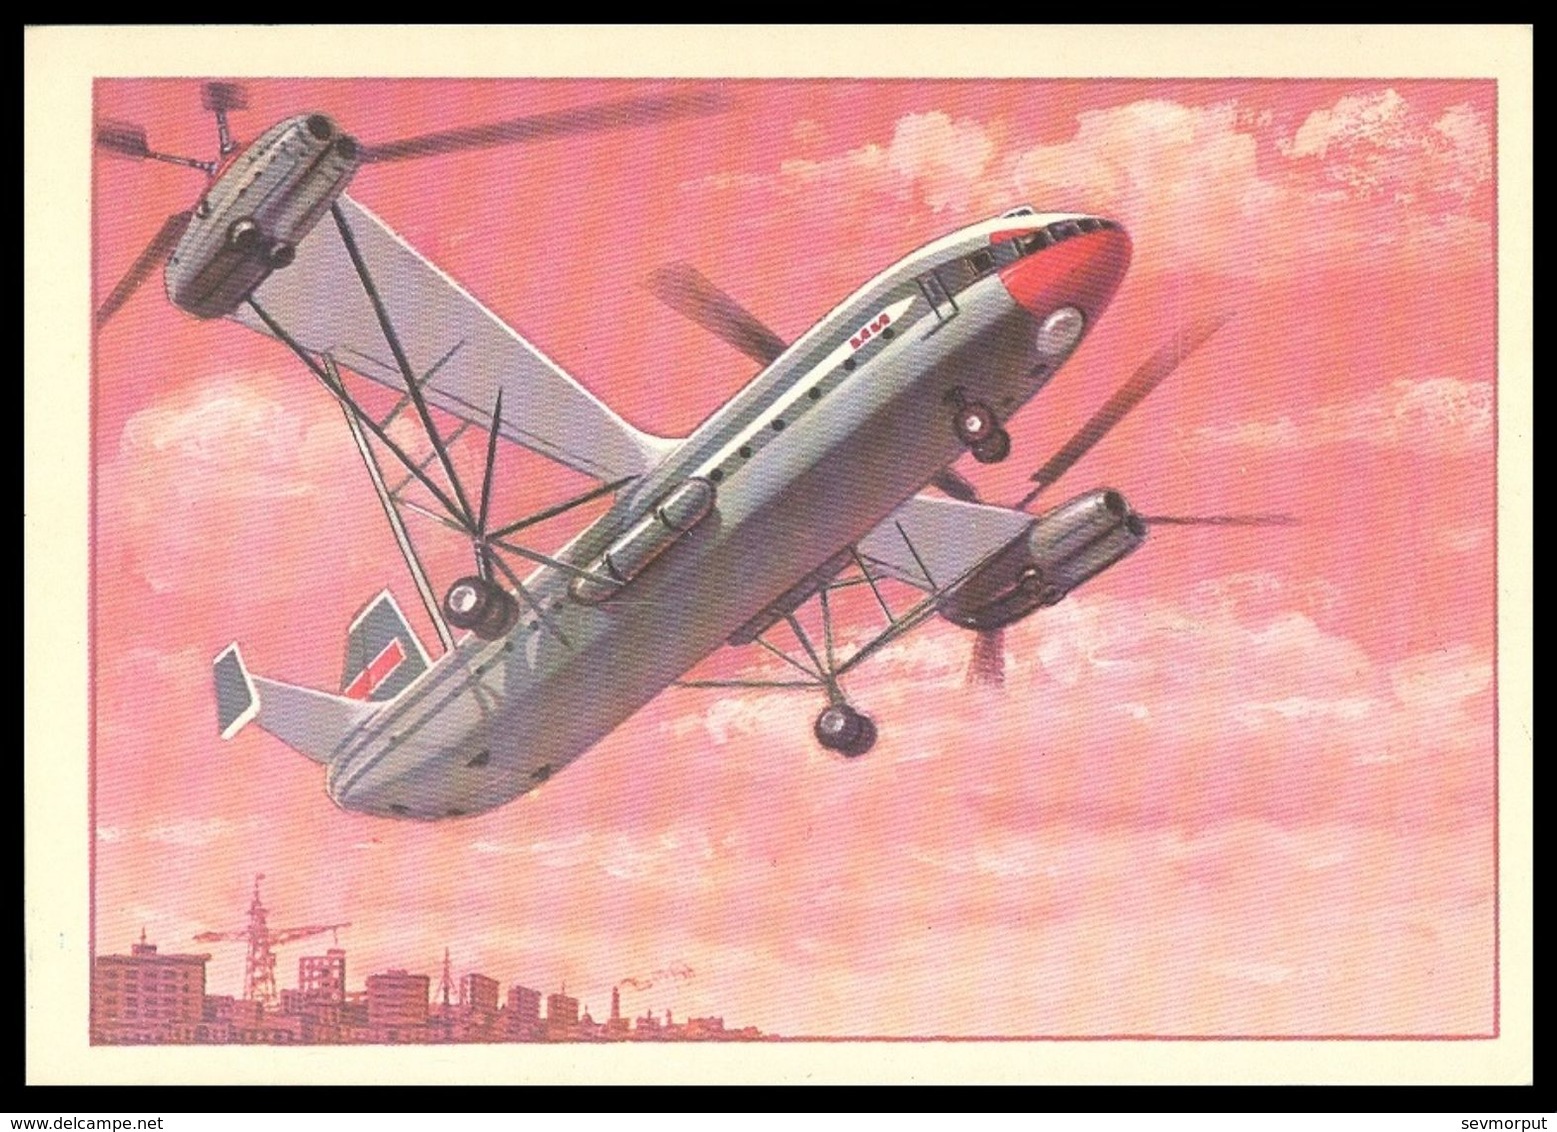 RUSSIA 1979 POSTCARD 8281 Mint HELICOPTER "V-12" AVIATION "B-12 HÉLICOPTÈRE HUBSCHRAUBER TRANSPORT USSR TsFA - Elicotteri